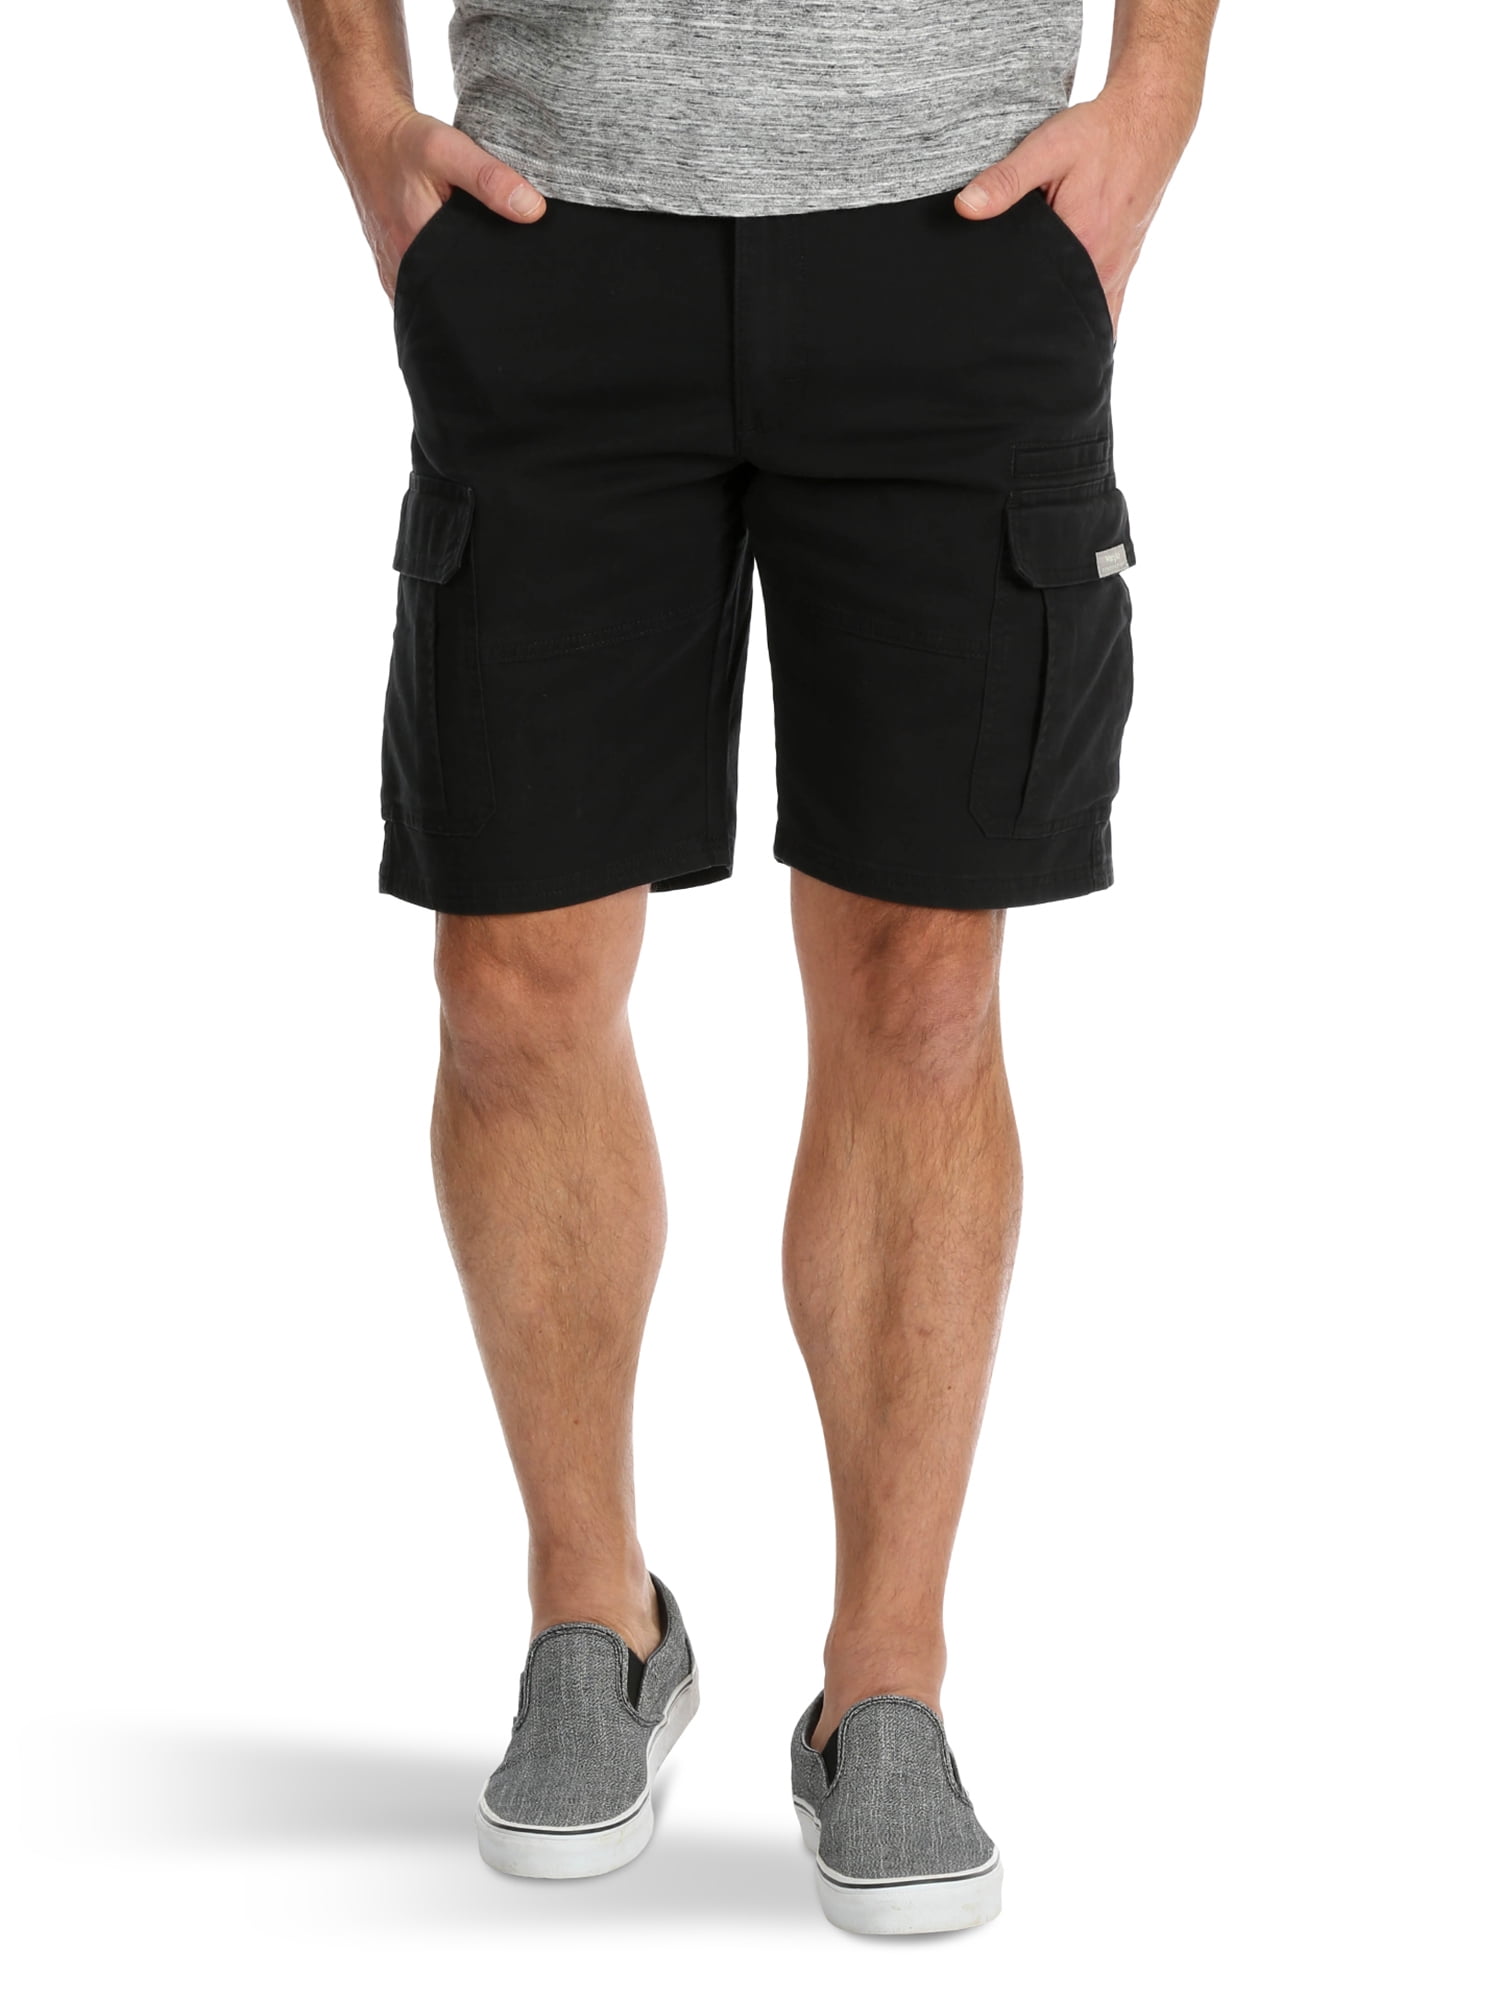 Wrangler Men's Stretch Cargo Style Shorts, Relaxed Fit 